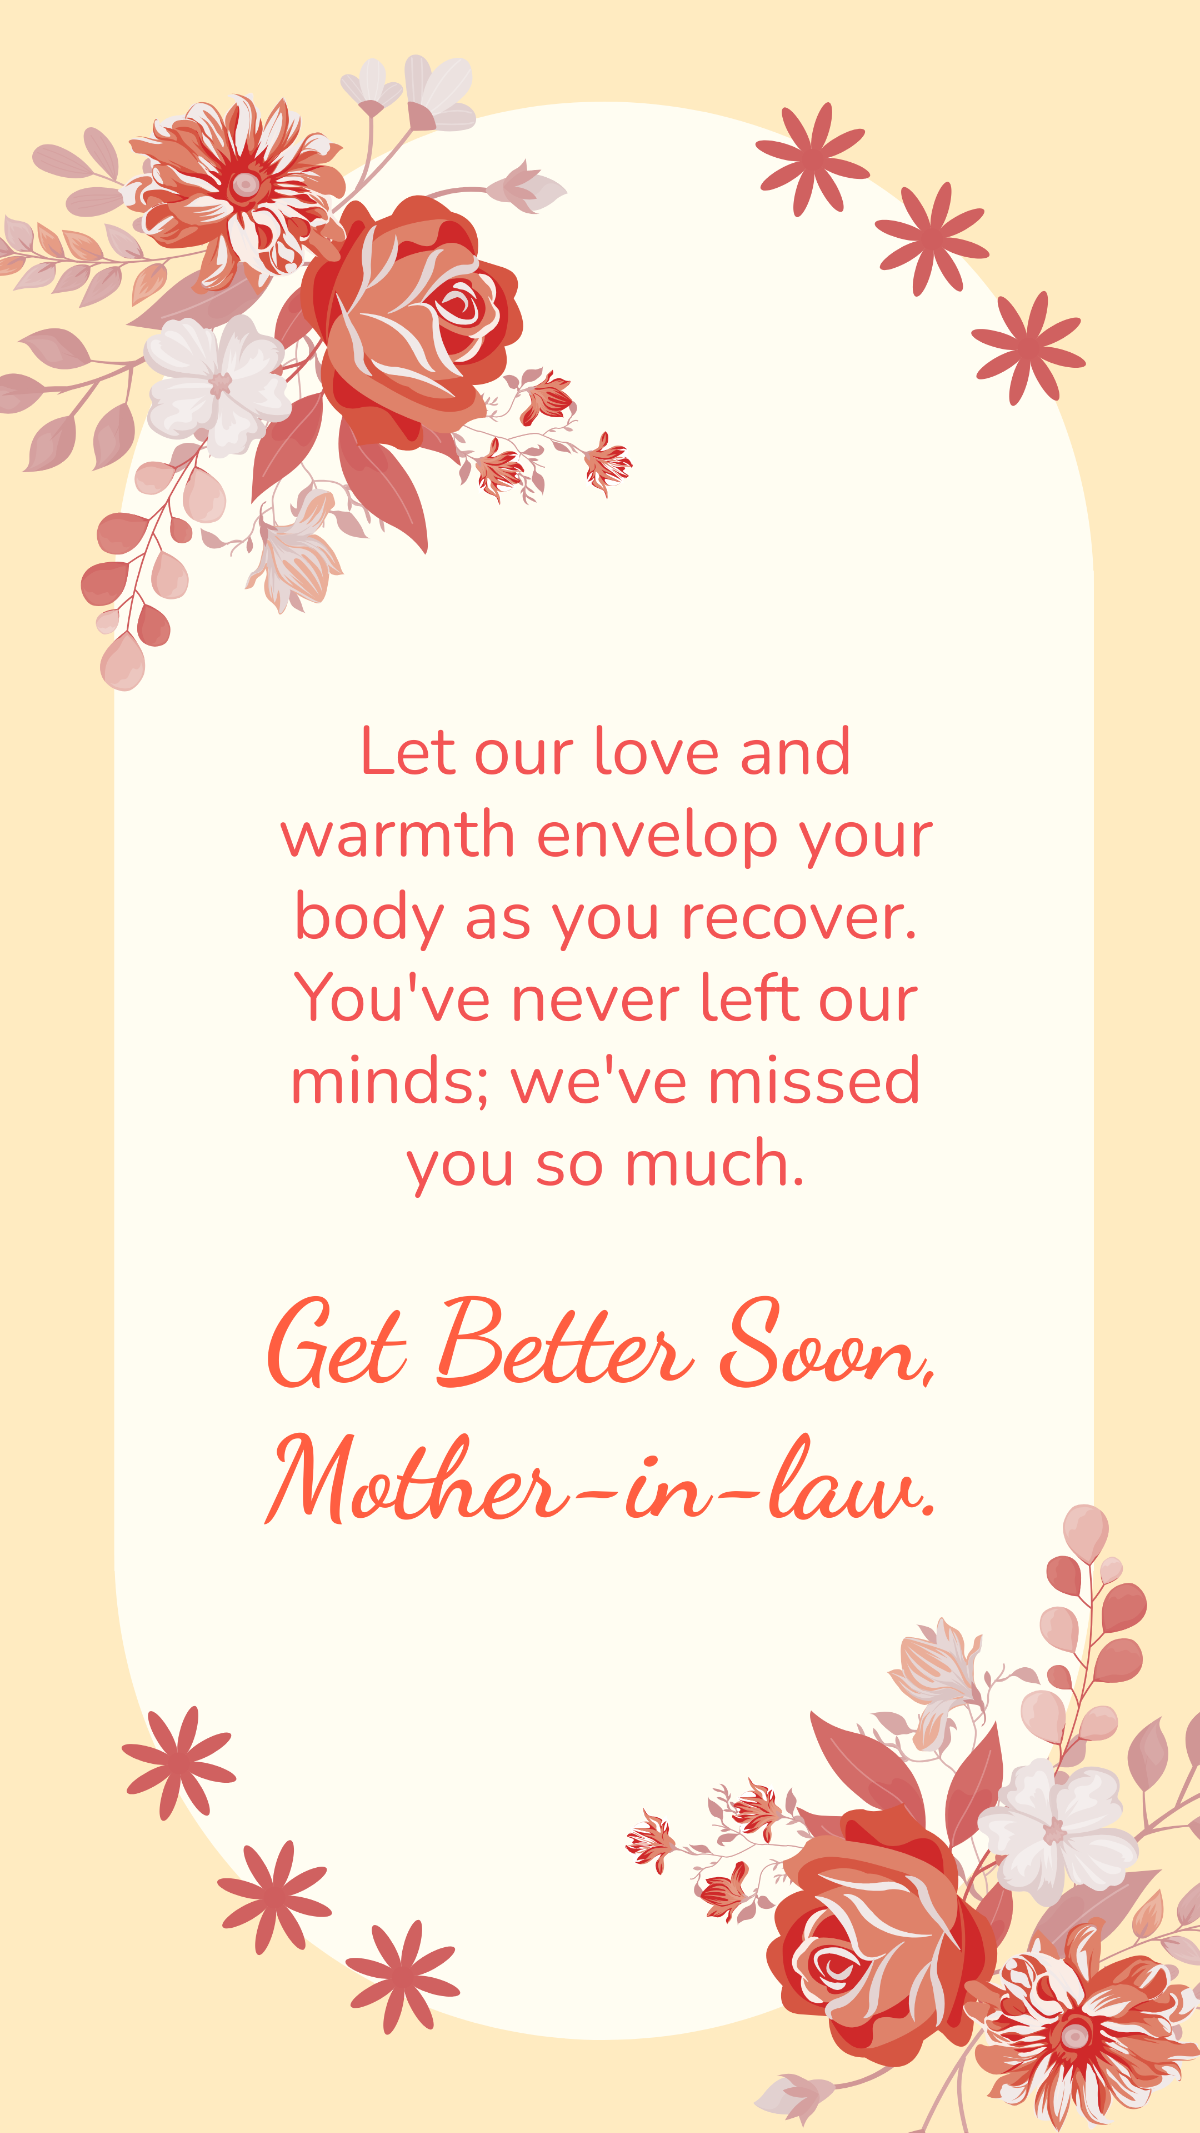 Get Well Soon Message For Mother In Law Template